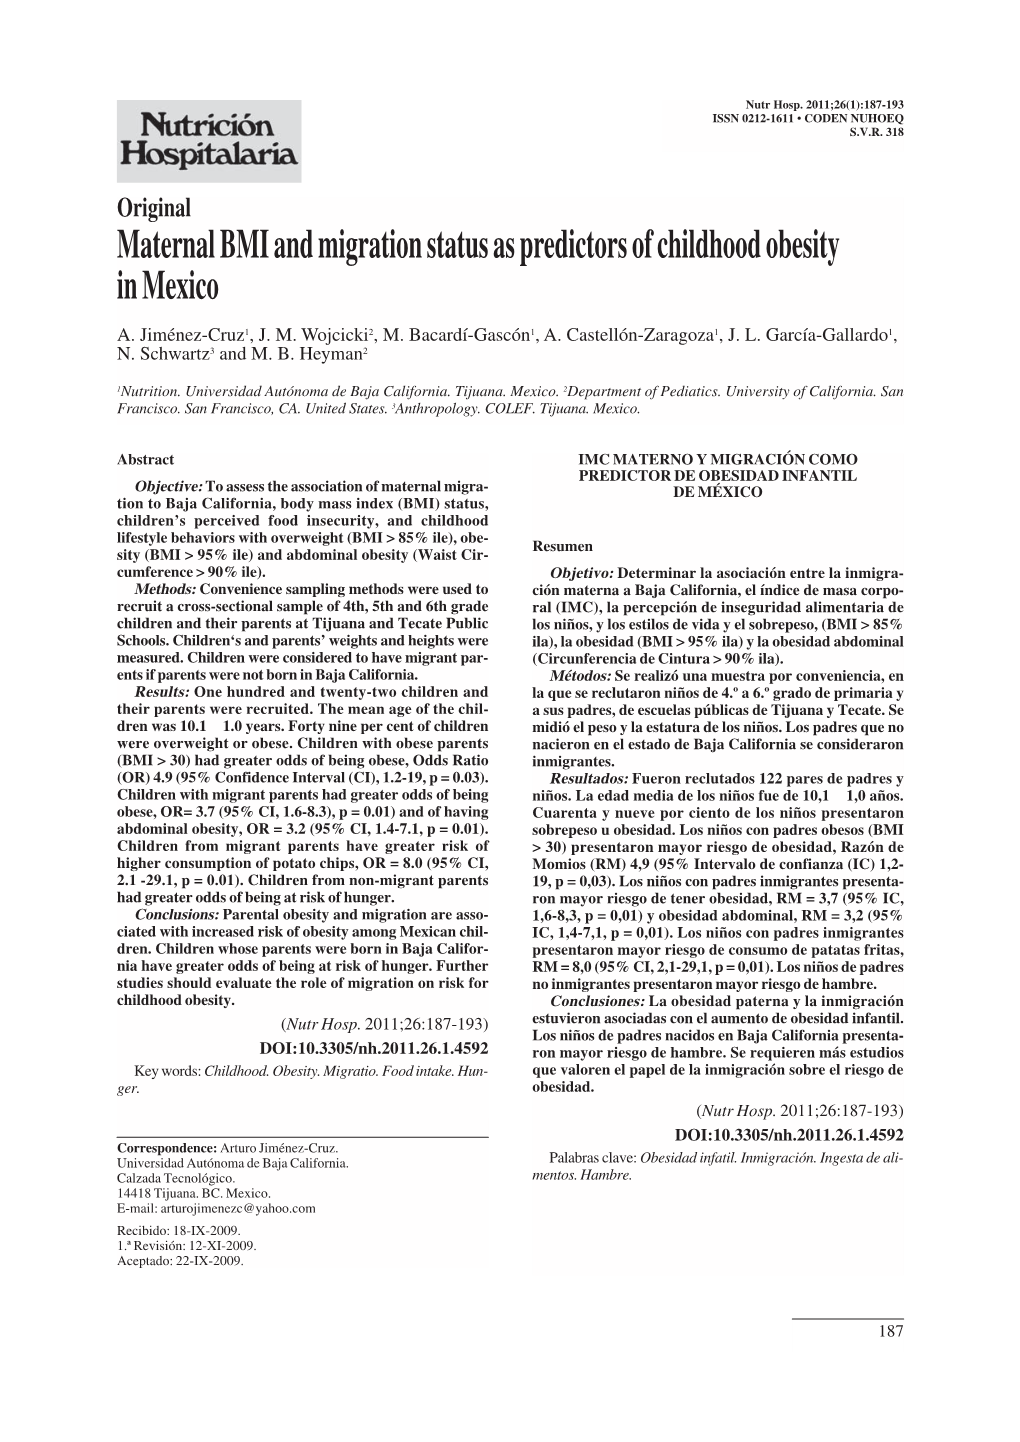 Maternal BMI and Migration Status As Predictors of Childhood Obesity in Mexico